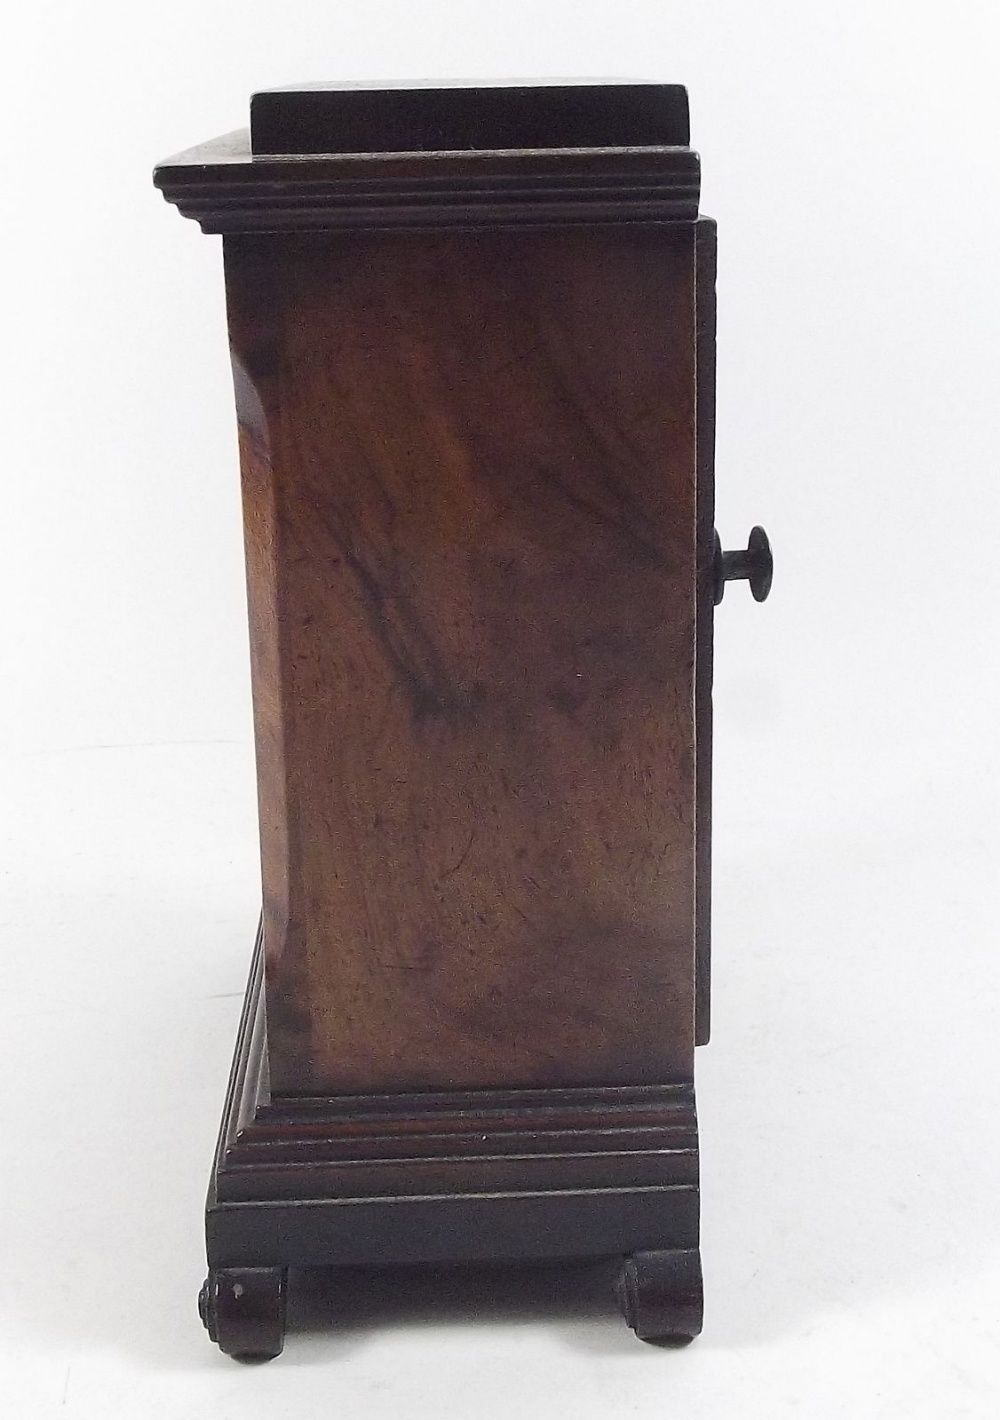 A walnut mantel clock with replacement movement, 19cm high - Image 2 of 2